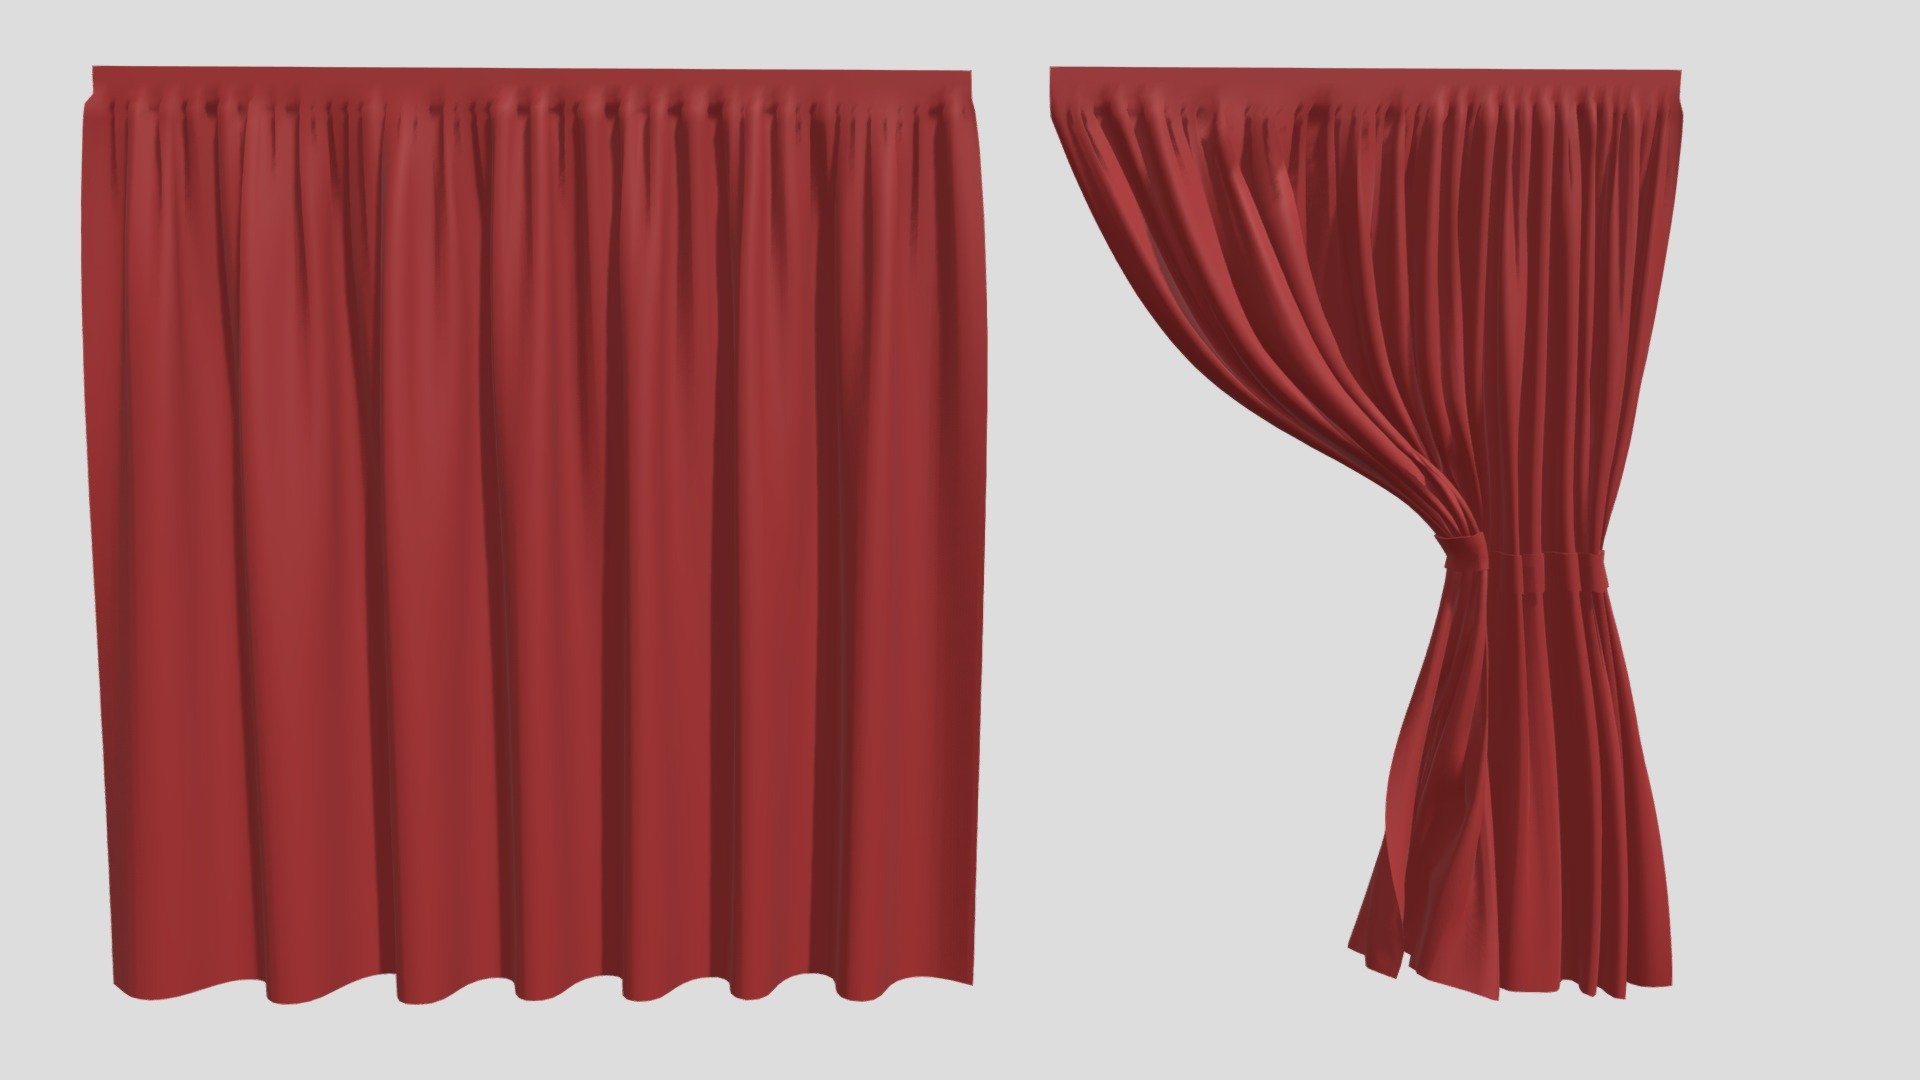 Curtains straightened and gathered. Falling fabric with pleats.
I made this model according to the tutorial about 3d max by Evgeny Gripinsky on YouTube.
3D GRIPINSKY - Curtain - Download Free 3D model by milaink 3d model